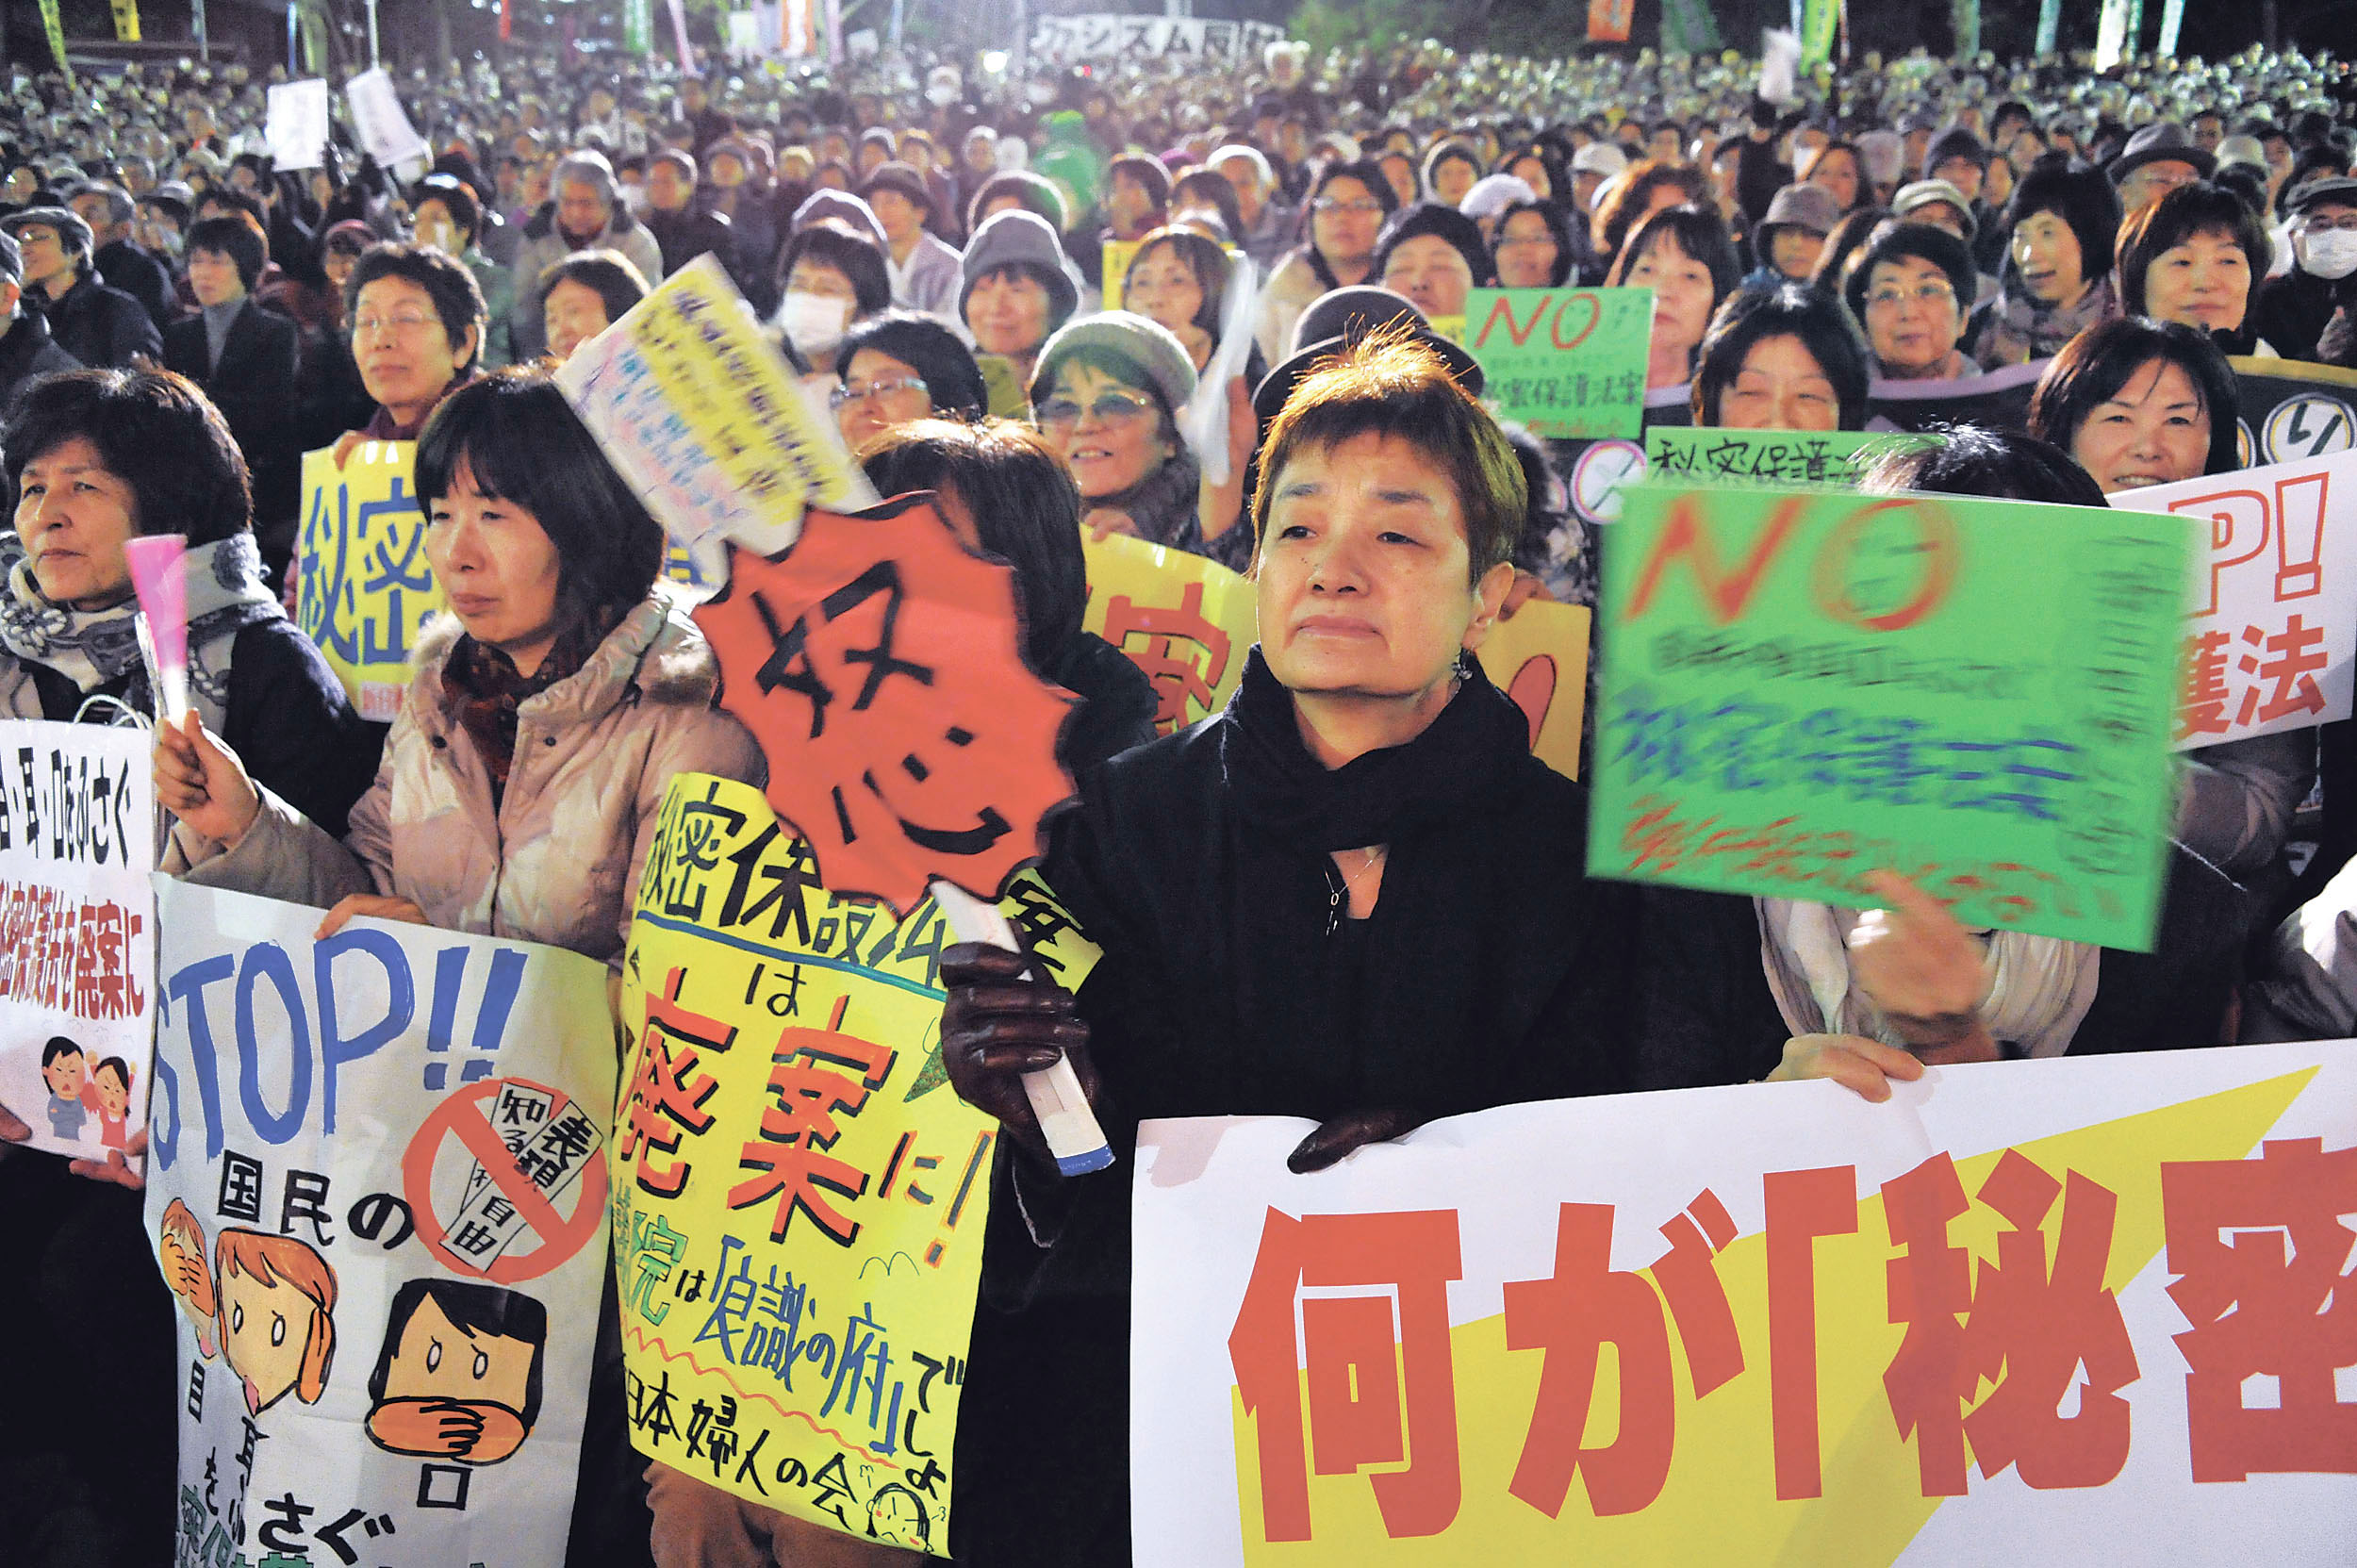 No secrets: Some 15,000 people gather in Hibiya, Tokyo, to protest the state secrets bill Dec. 6, the day the Diet passed it. | YOSHIAKI MIURA